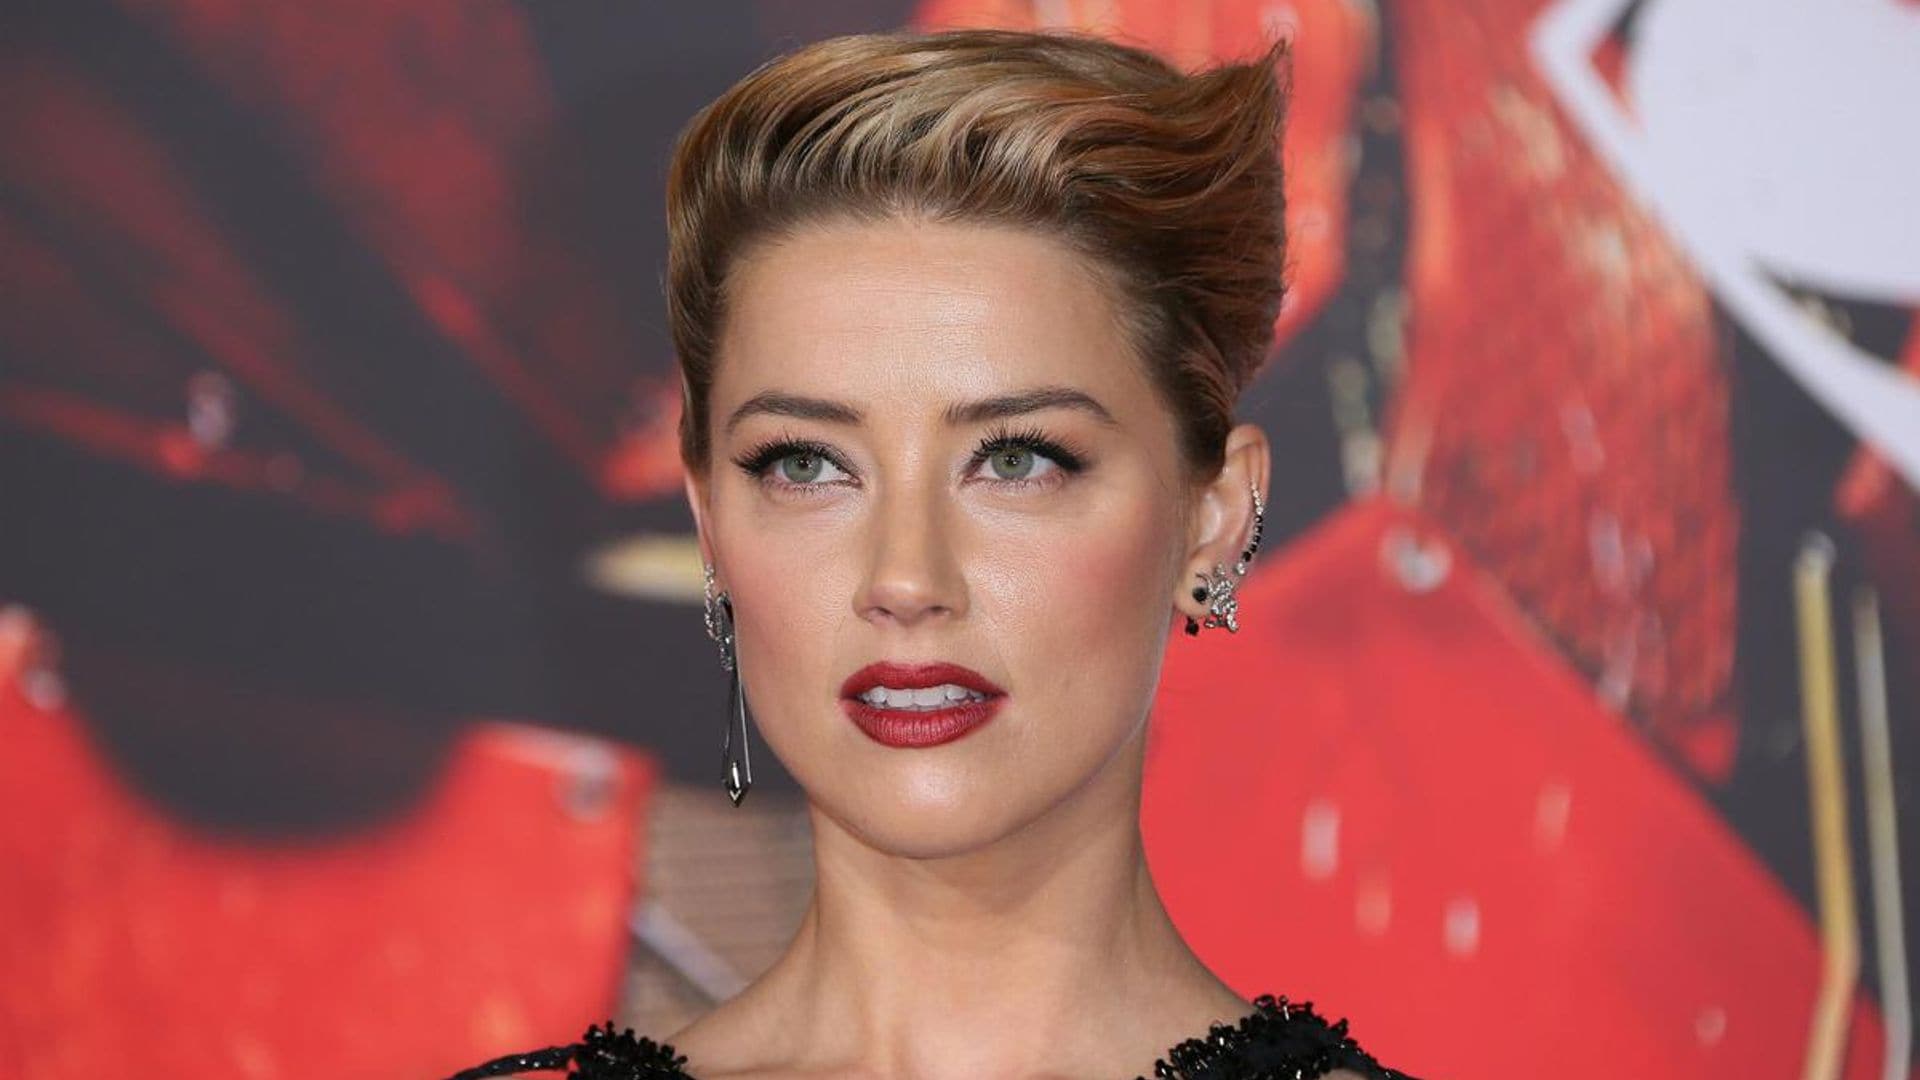 Amber Heard is perfect, according to a study in scientific beauty